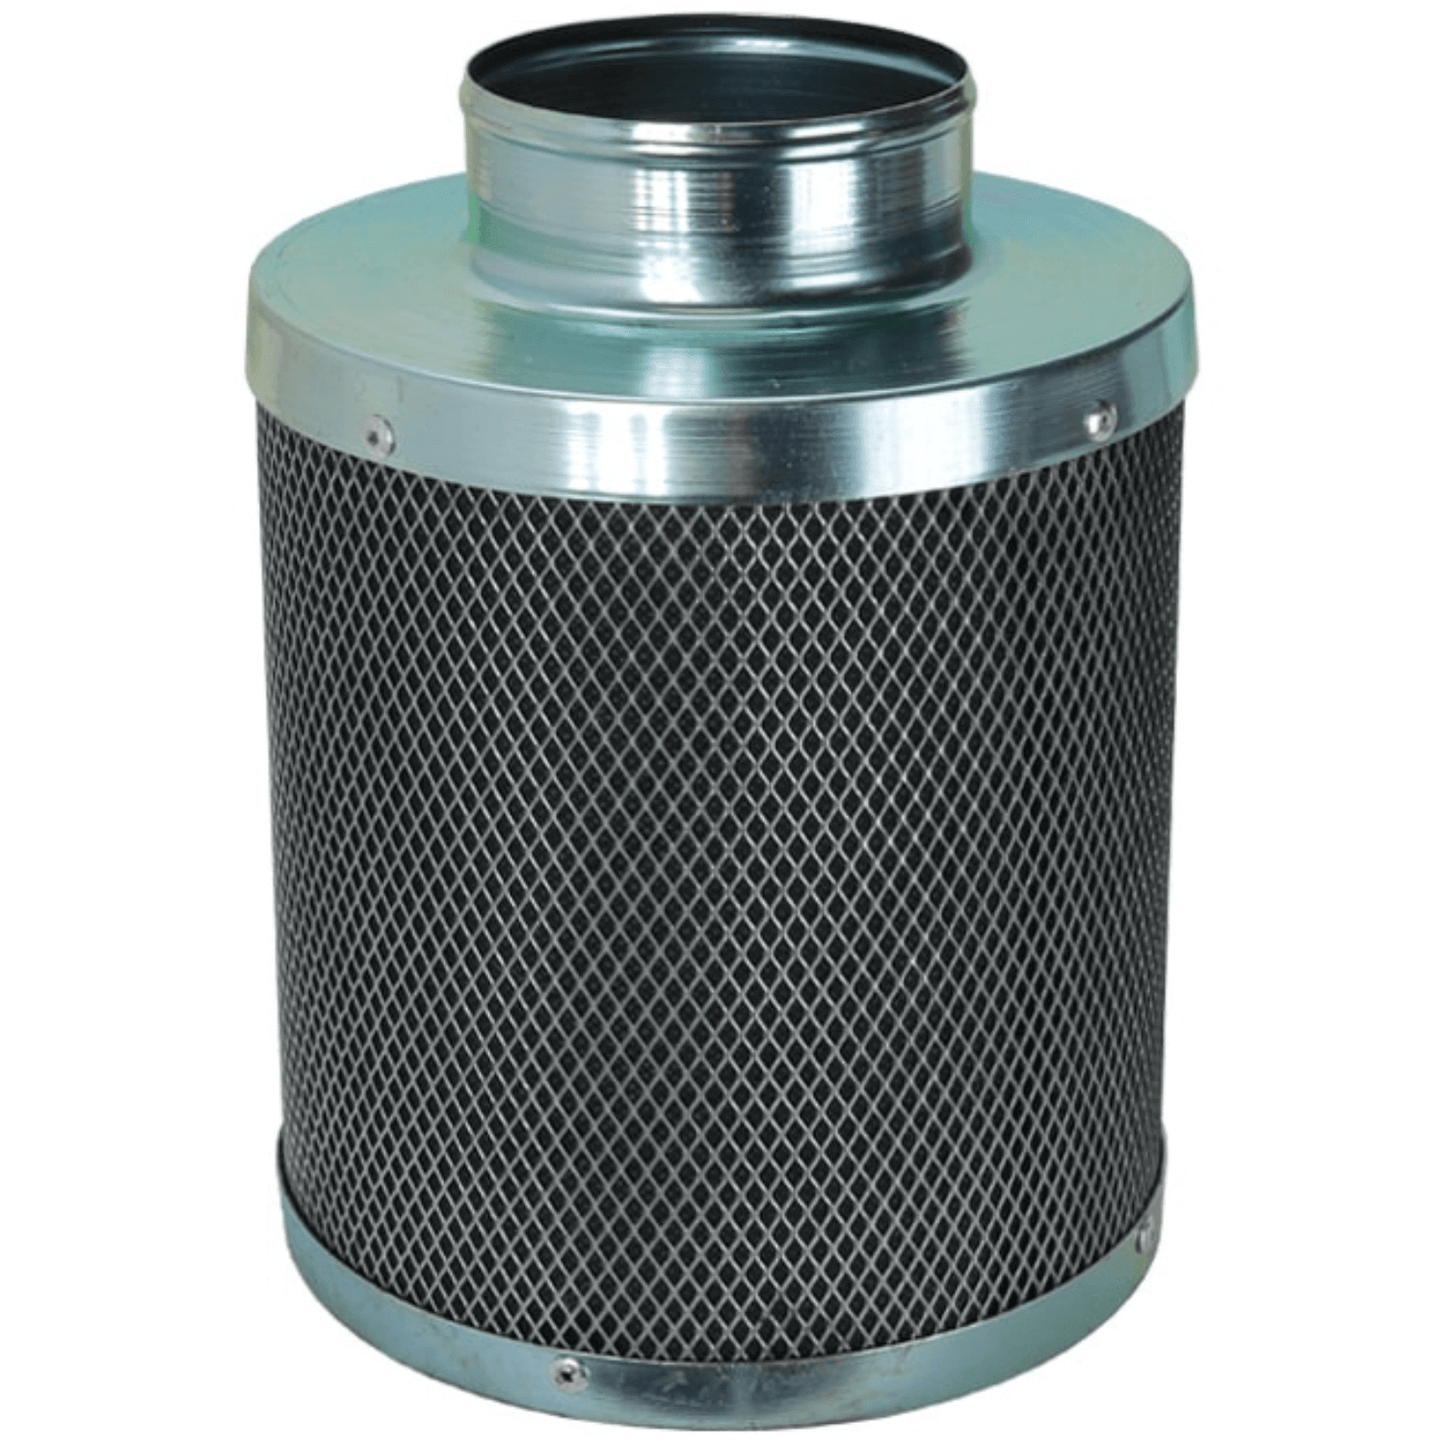 Charco Filters Plus 4" X 10" Activated Carbon Air Filter 971204-1 Climate Control 816731010245